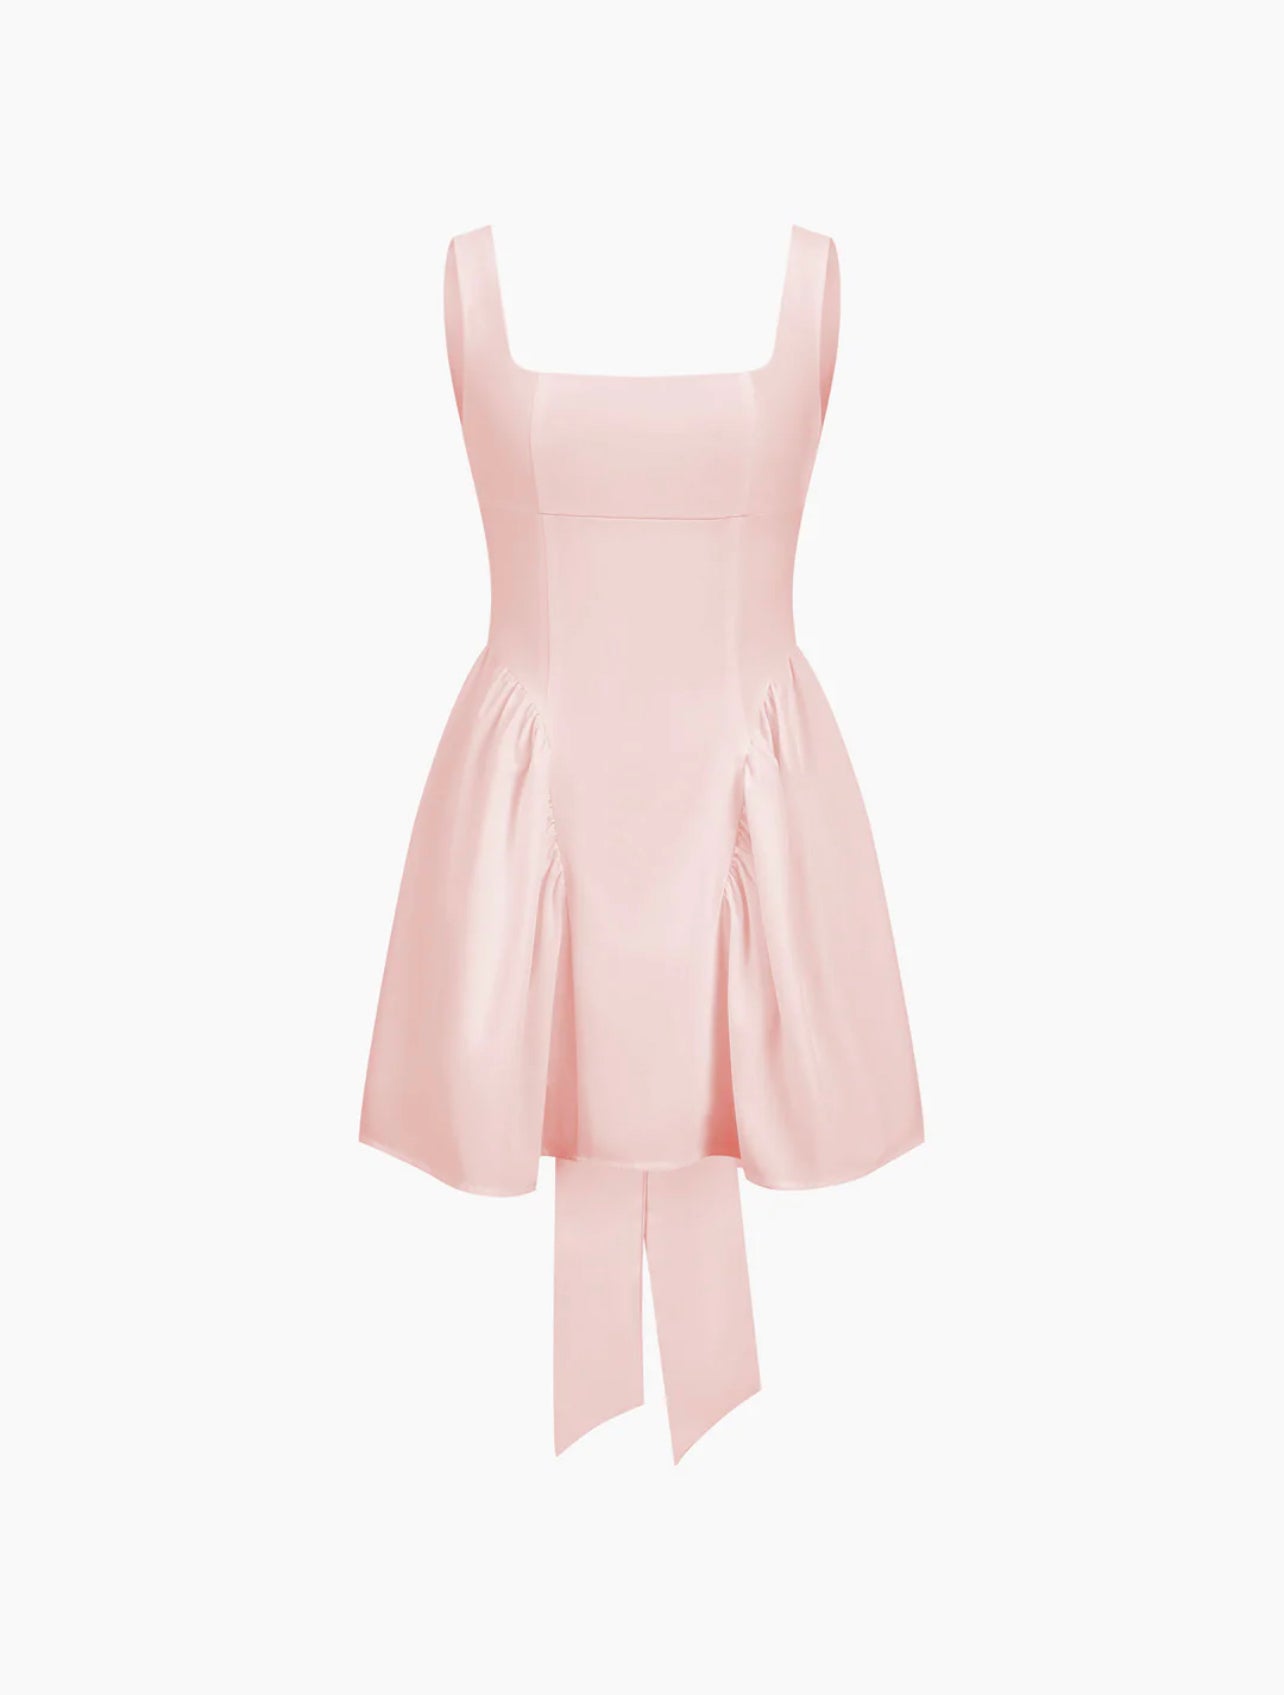 Lana Open Back Mini Dress with a Bow